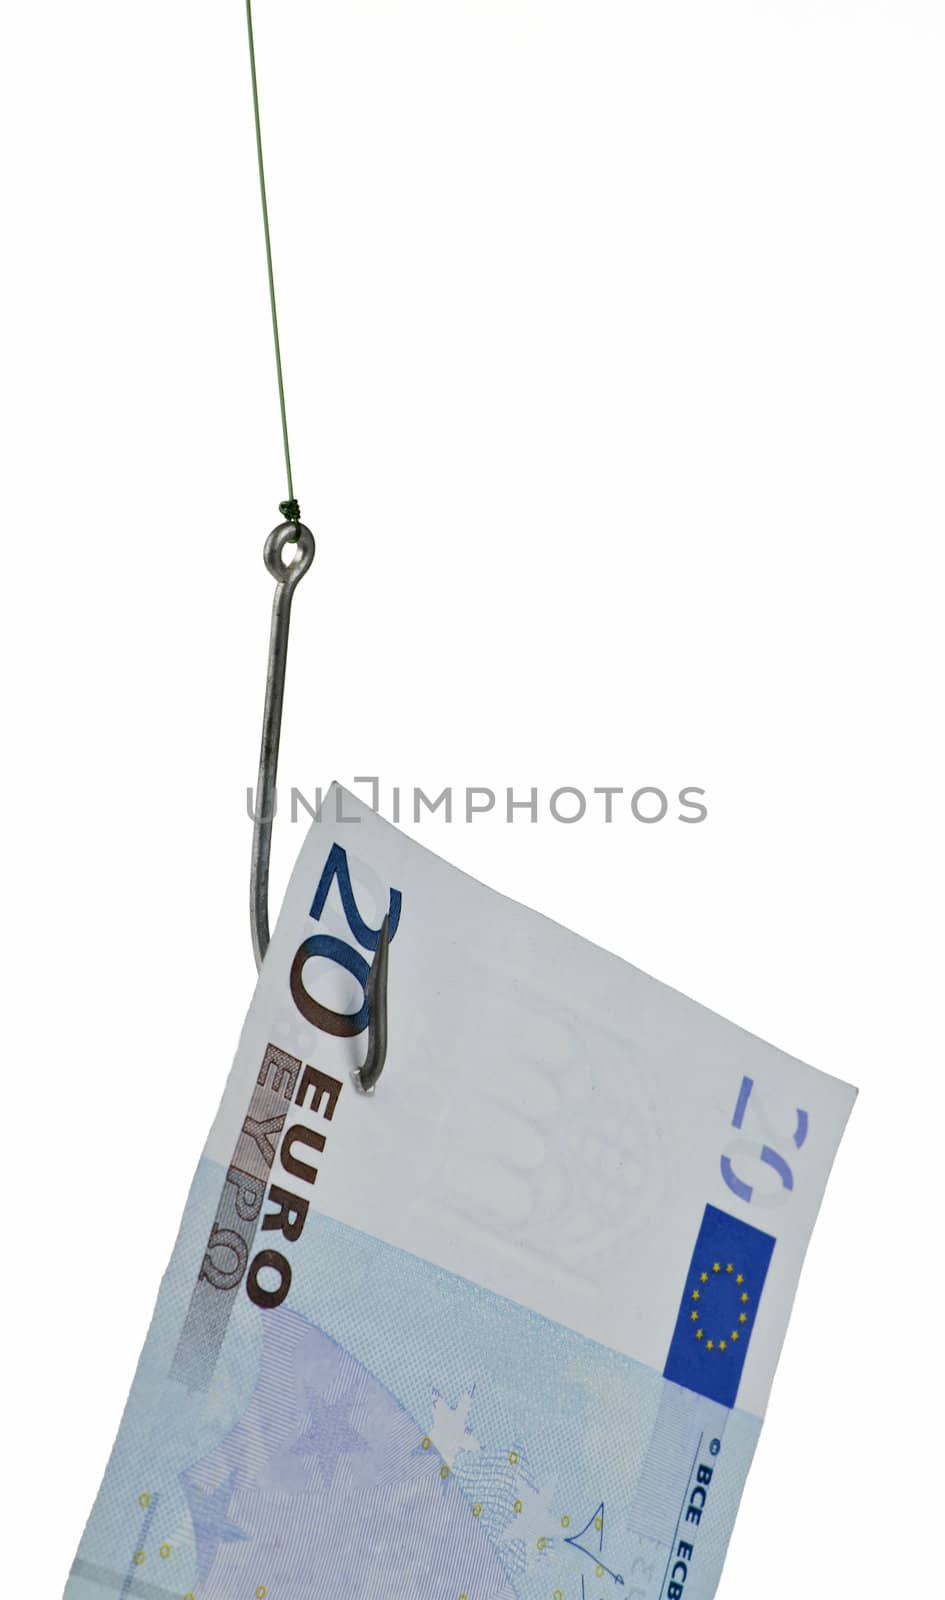 20 euro banknote on hook isolated in white background